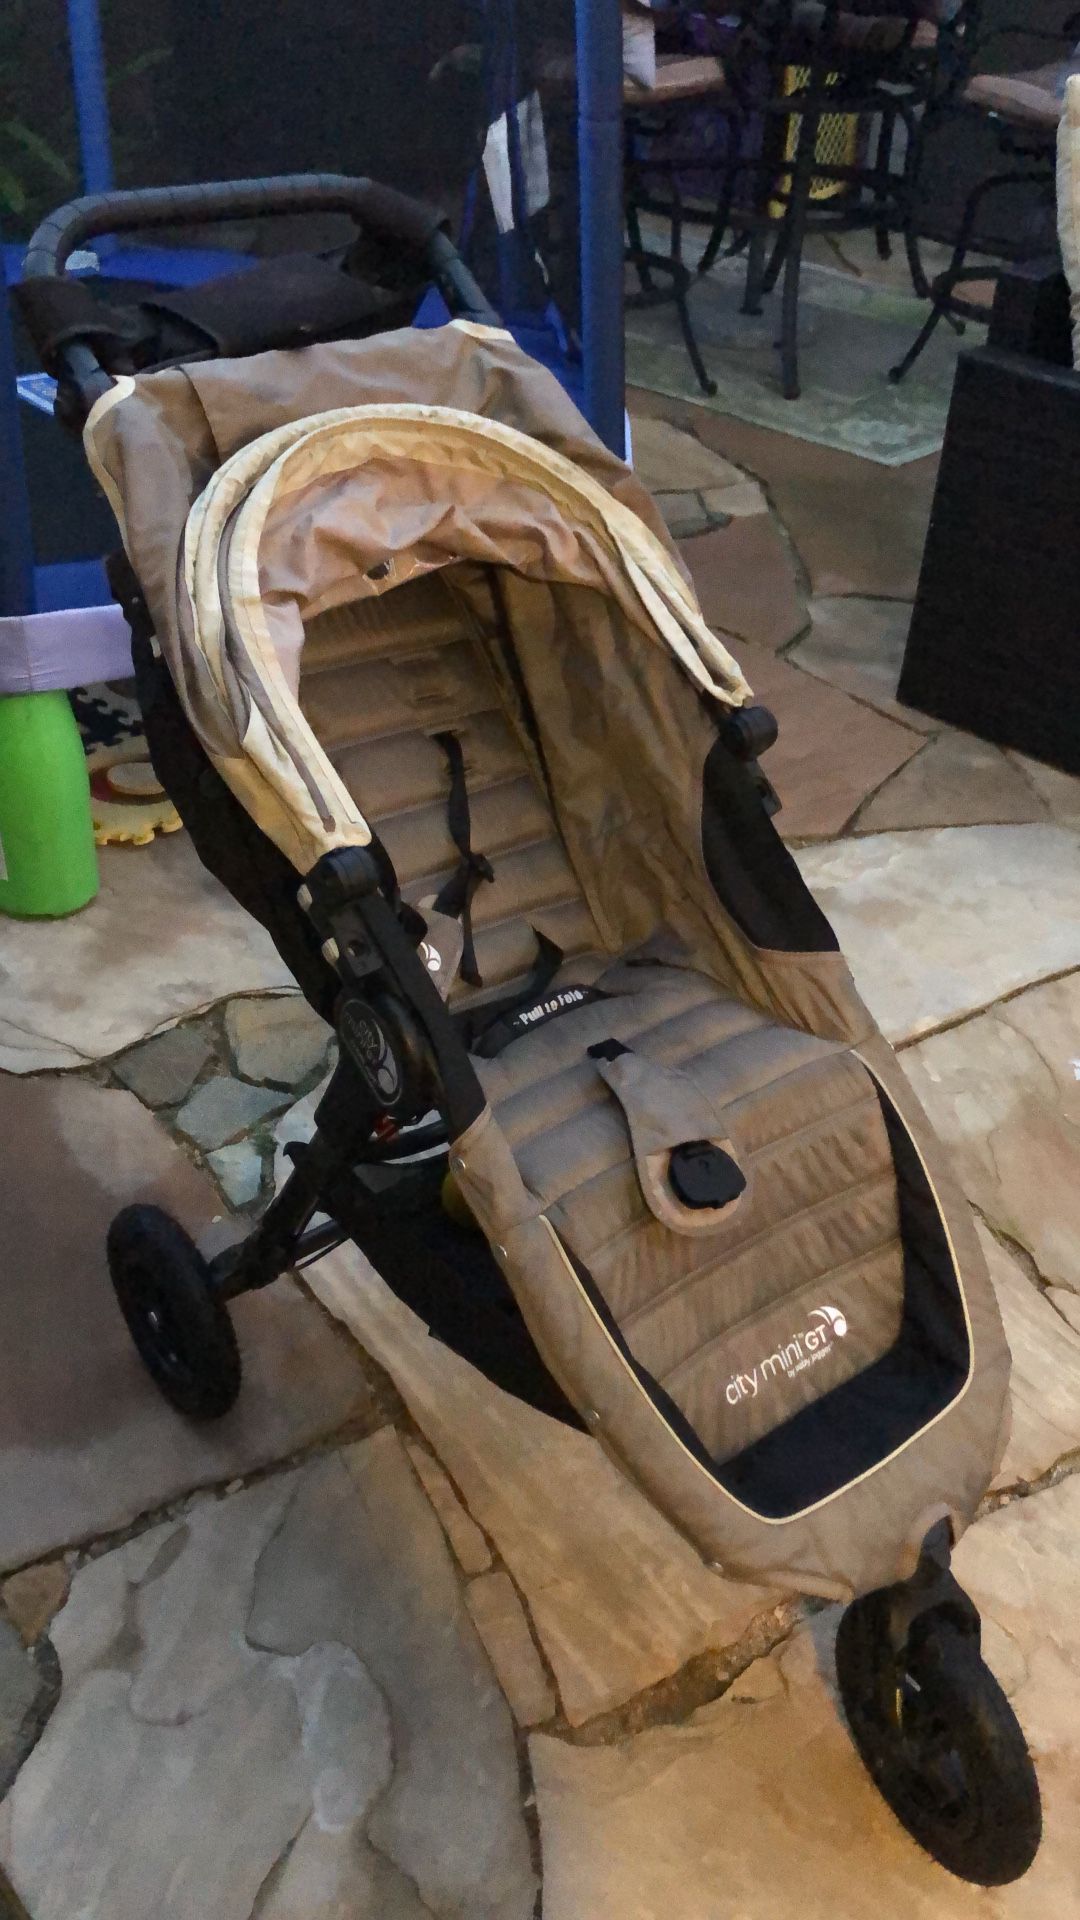 Baby Jogger City Mini GT Single in Sand/Stone for Sale in Encinitas, CA - OfferUp